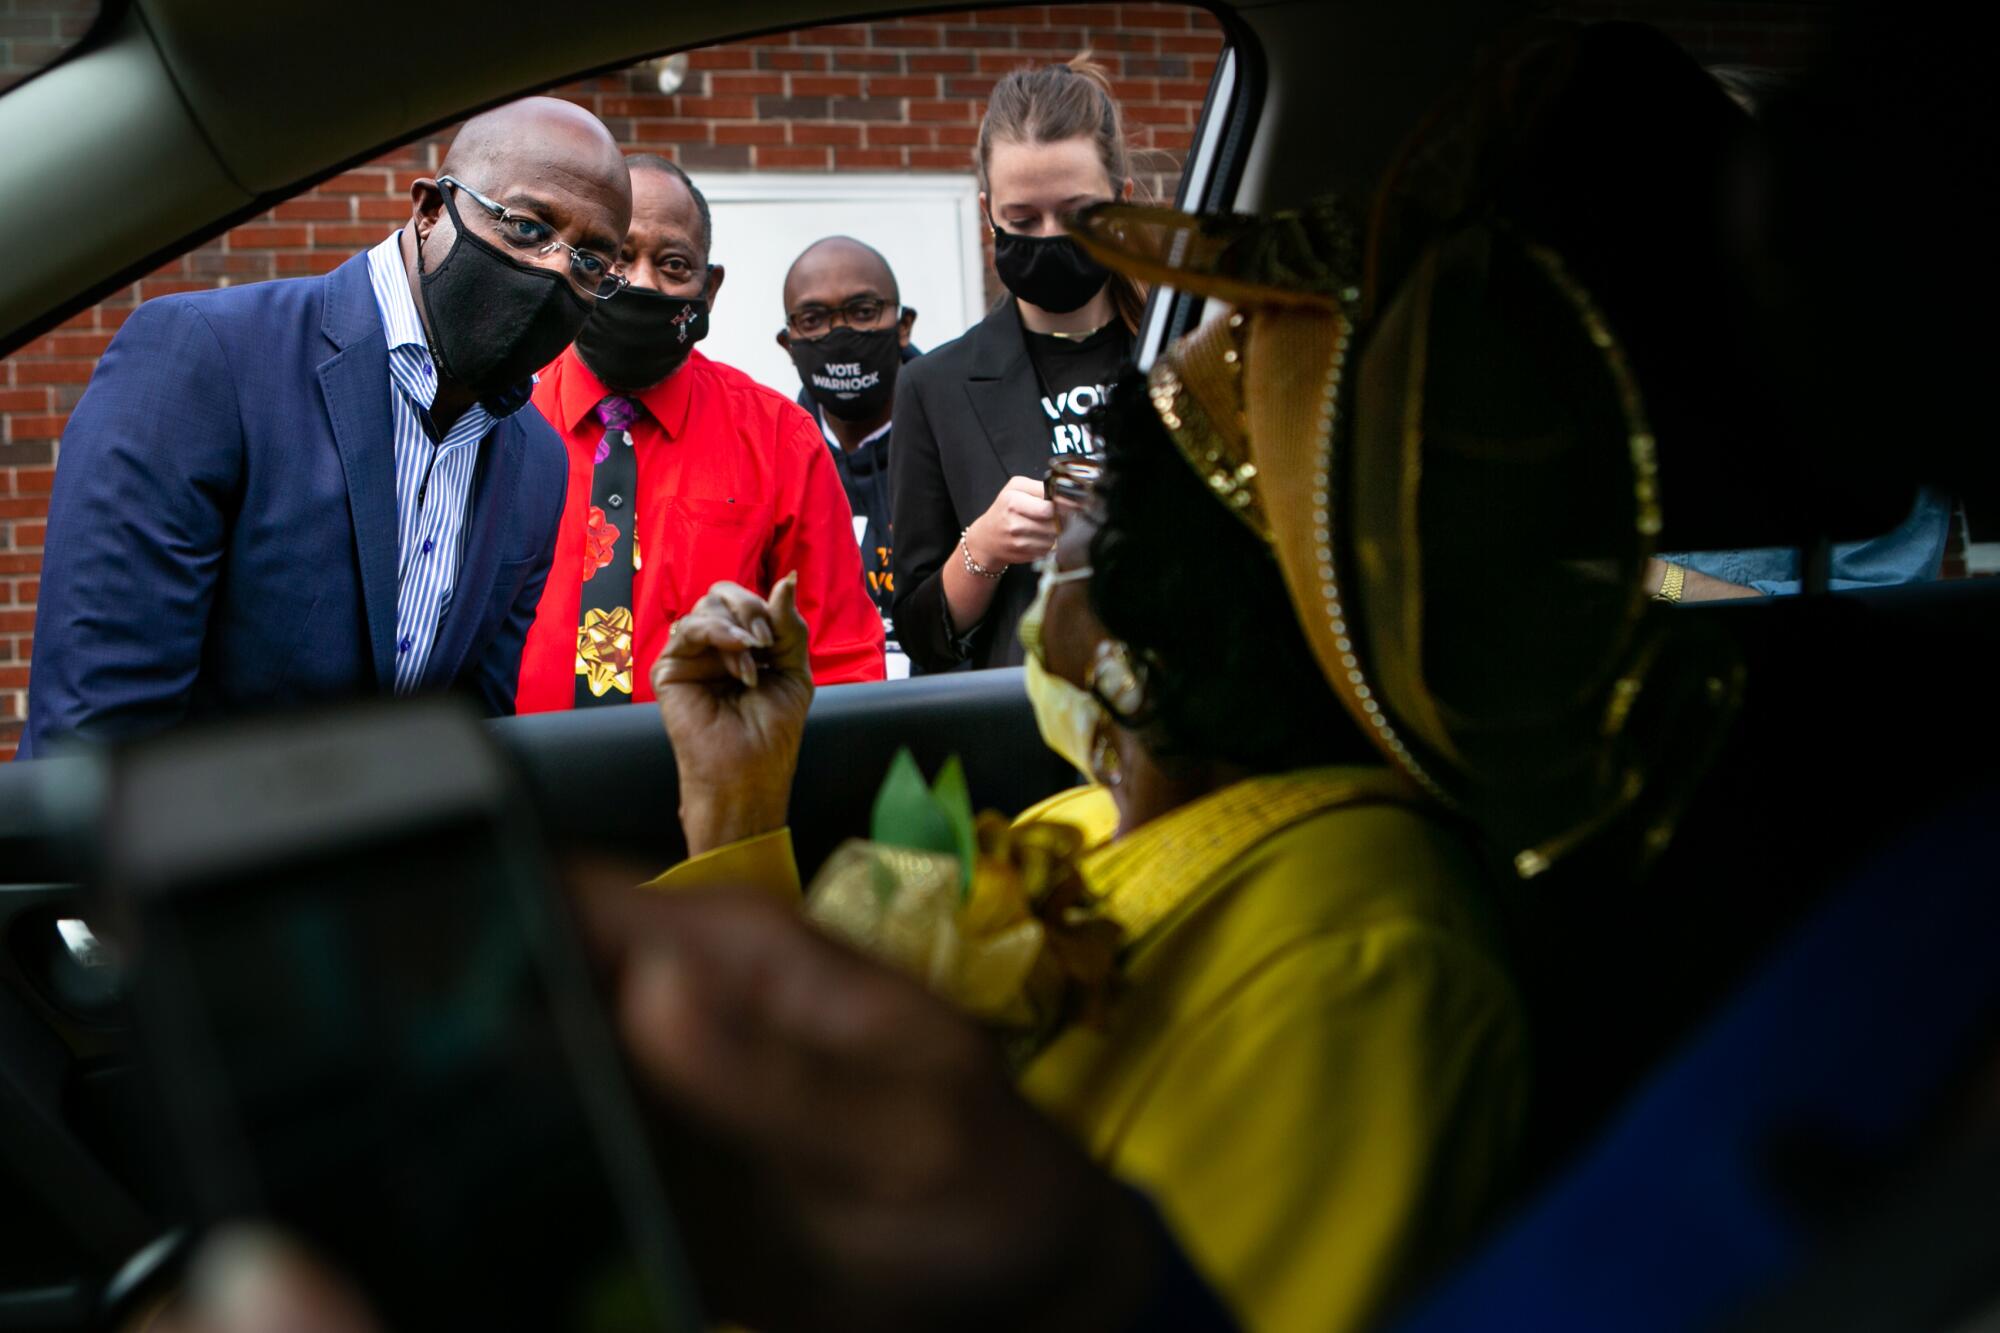 The Rev. Warnock, standing with several others in masks, speaks with a woman inside a car.